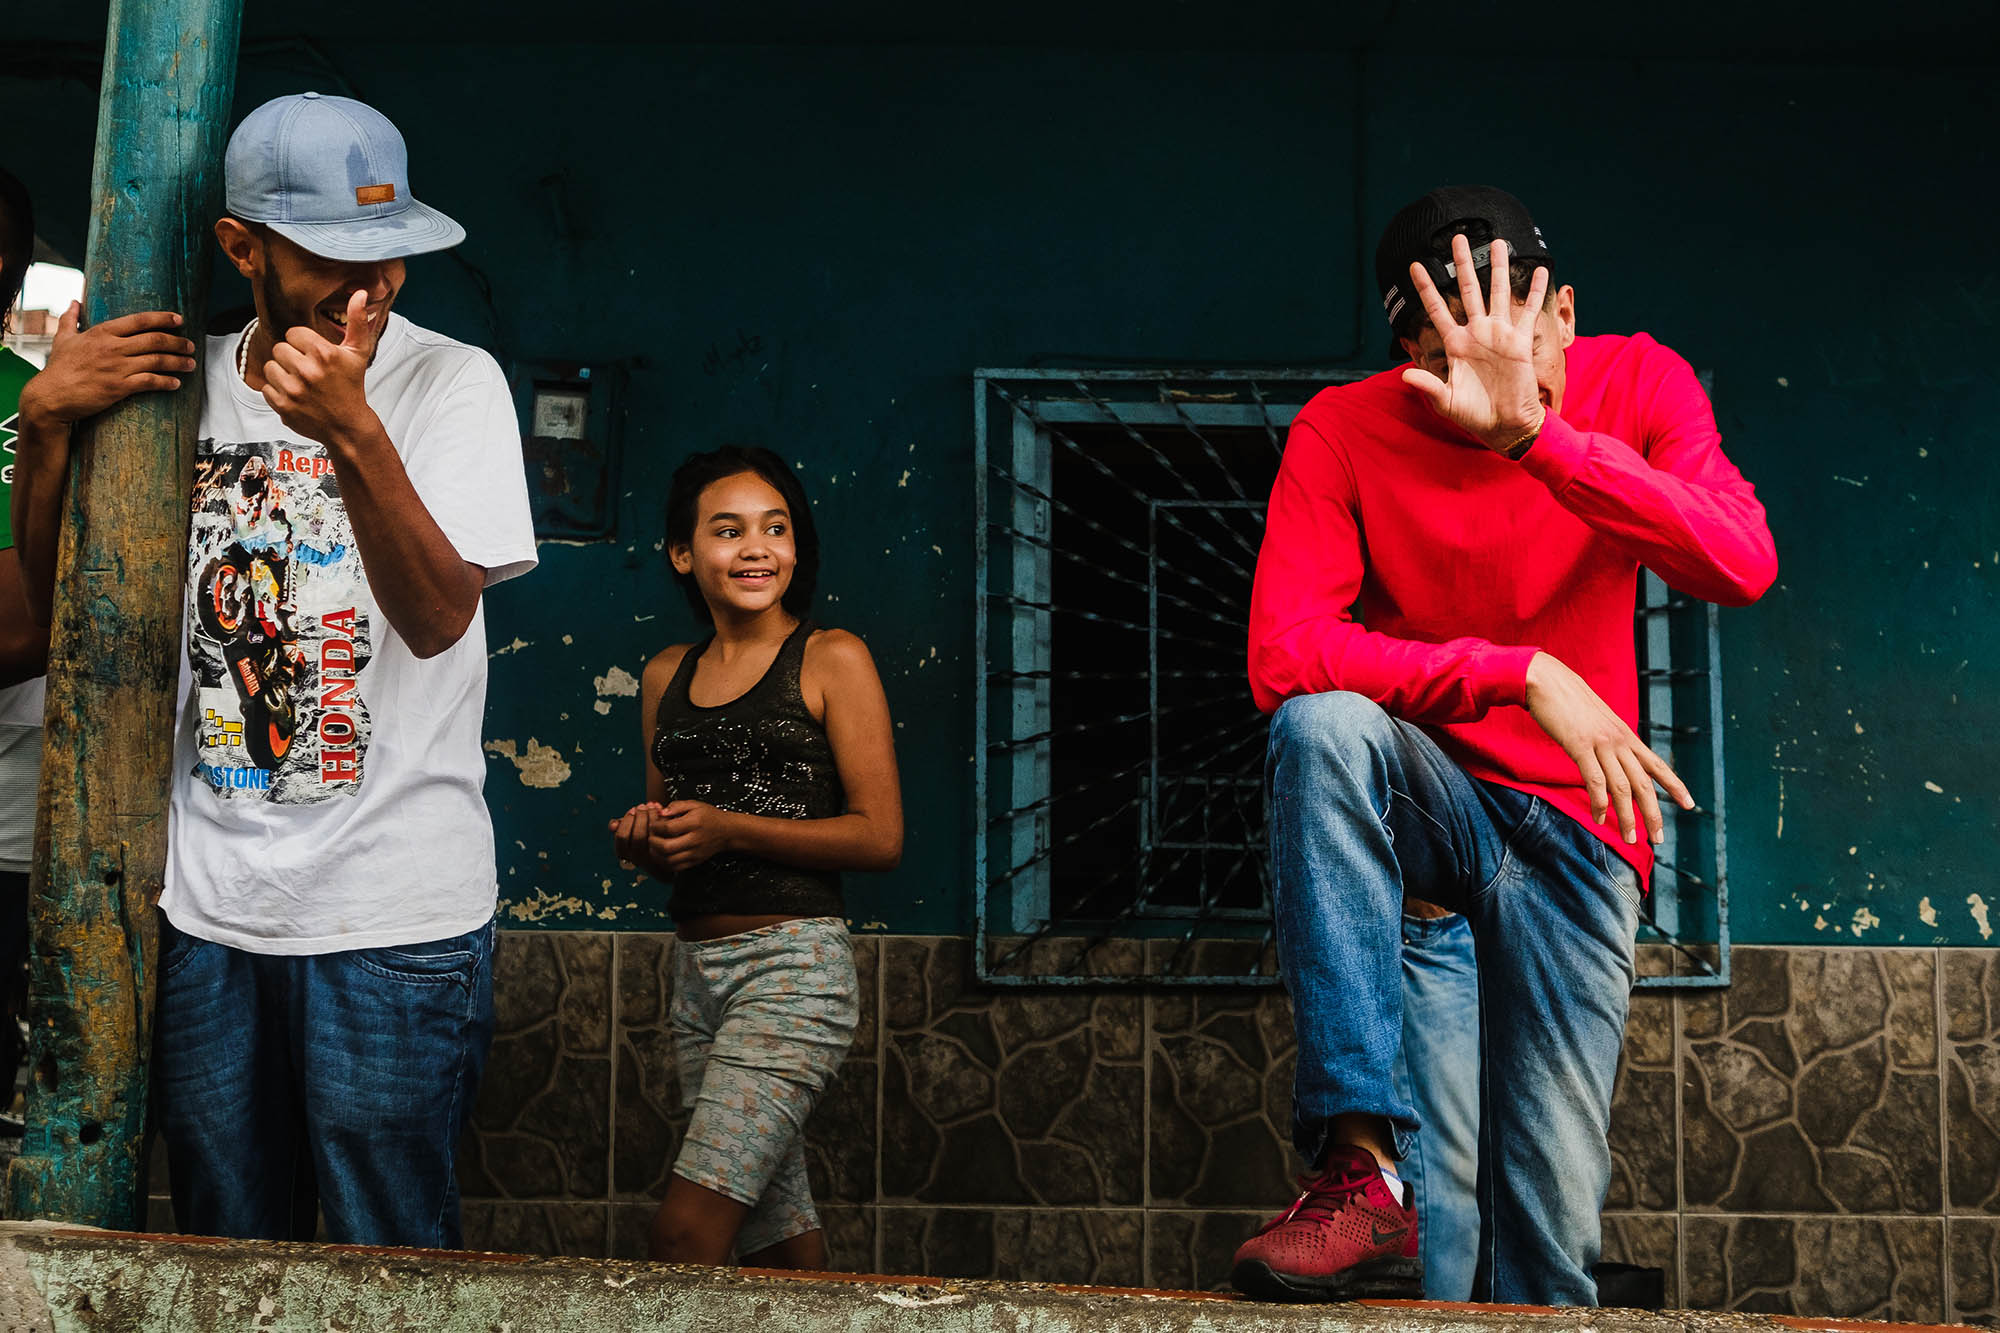 Street photography in Colombia